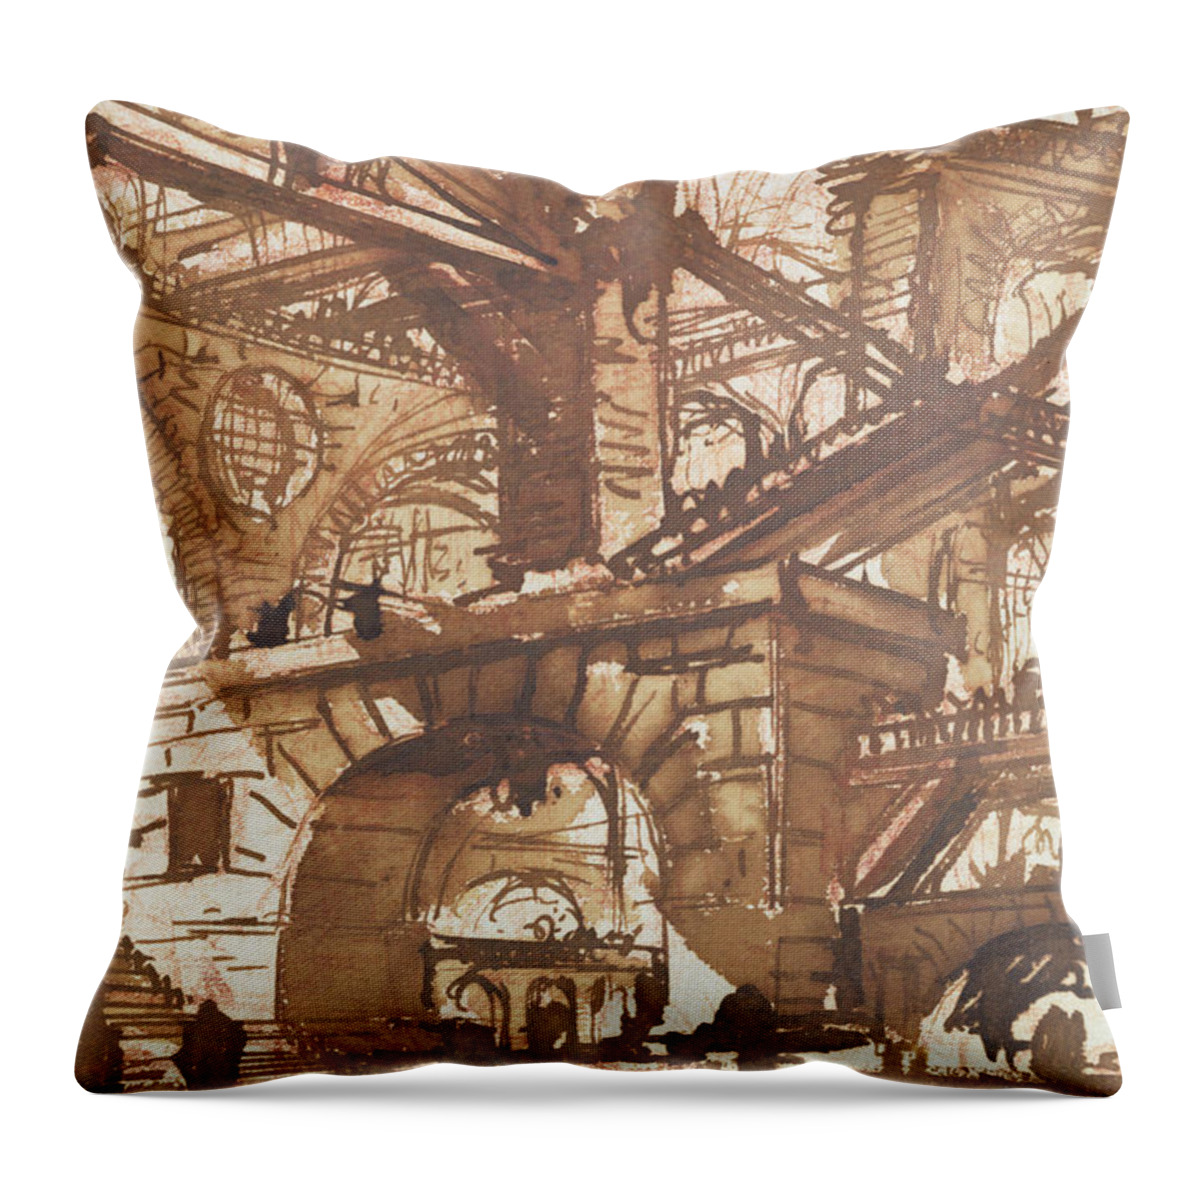 Gaol; Jail; Carceri D'invezione; Fictive; Fantastic; Vaulted; Multi Storey; Interior Throw Pillow featuring the drawing Drawing of an Imaginary Prison by Giovanni Battista Piranesi